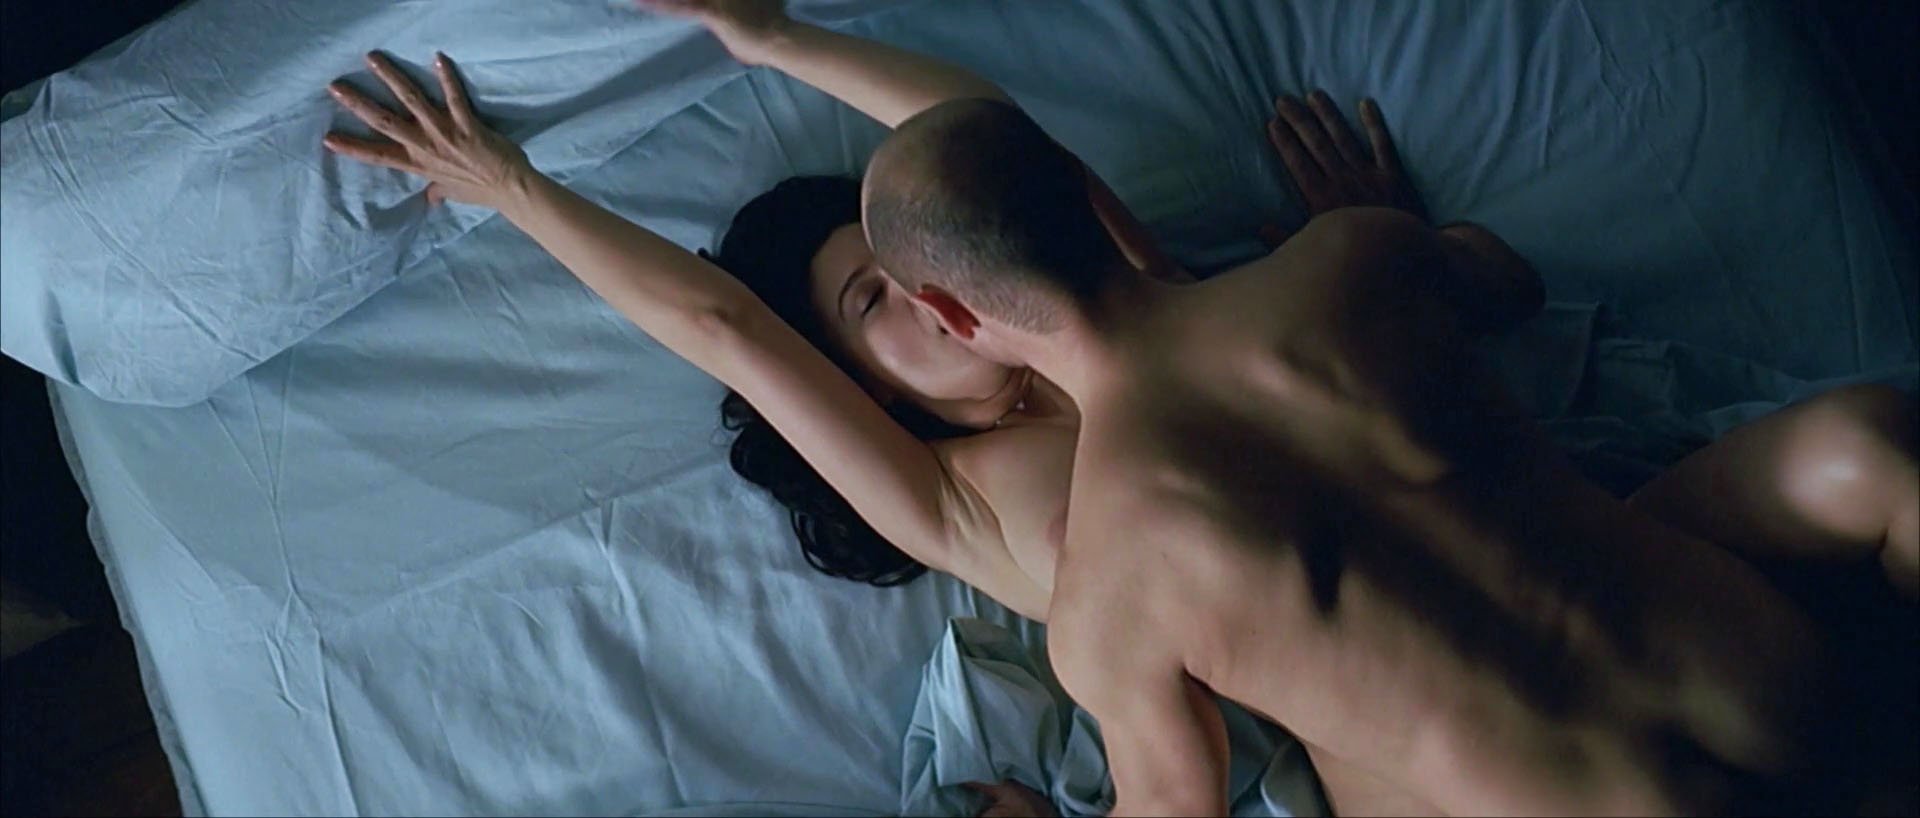 Monica Bellucci nude - How Much Do You Love Me (2005)